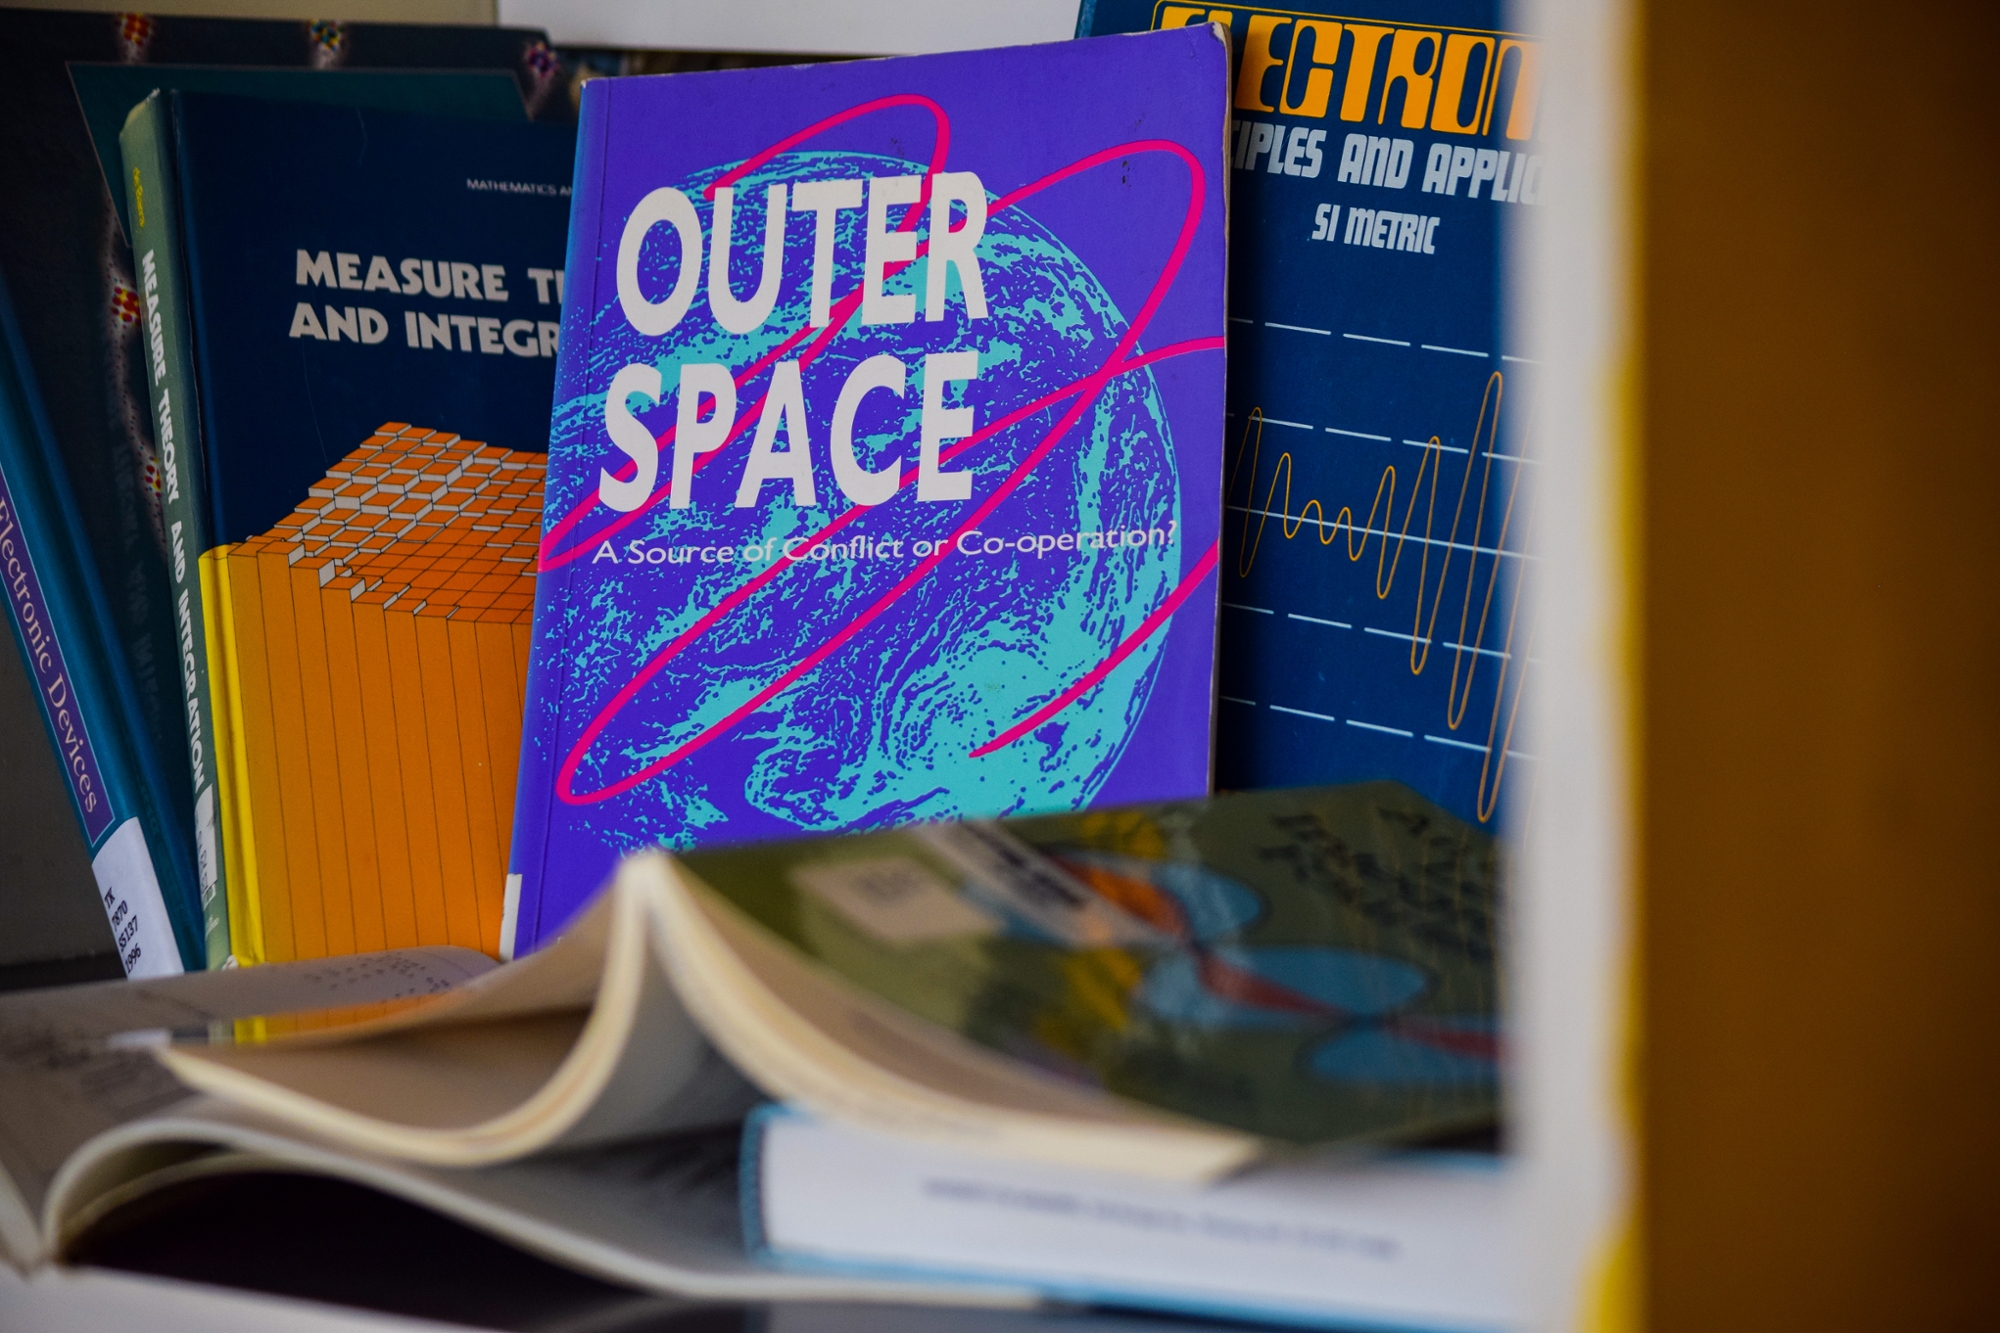 A display of vintage science titles; one reads, "Outer Space."